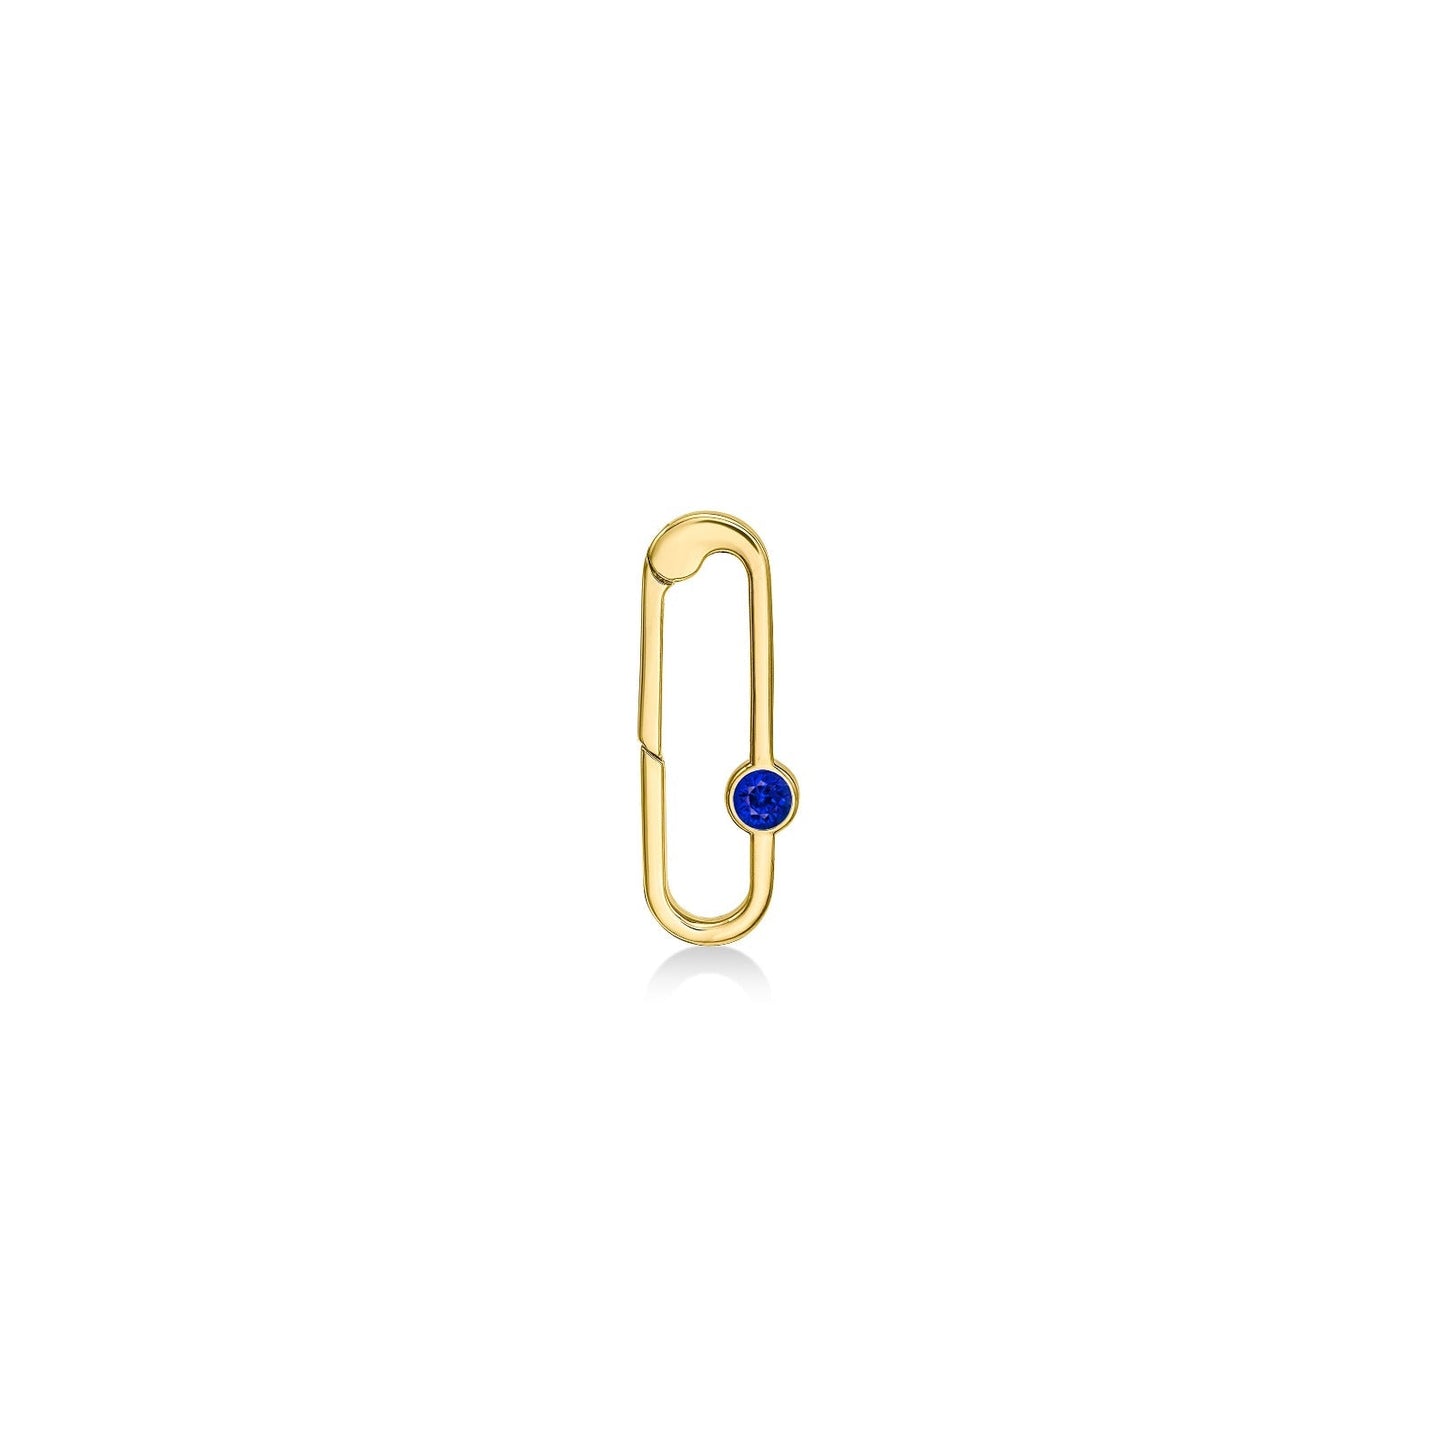 14k gold paperclip charm lock with sapphire